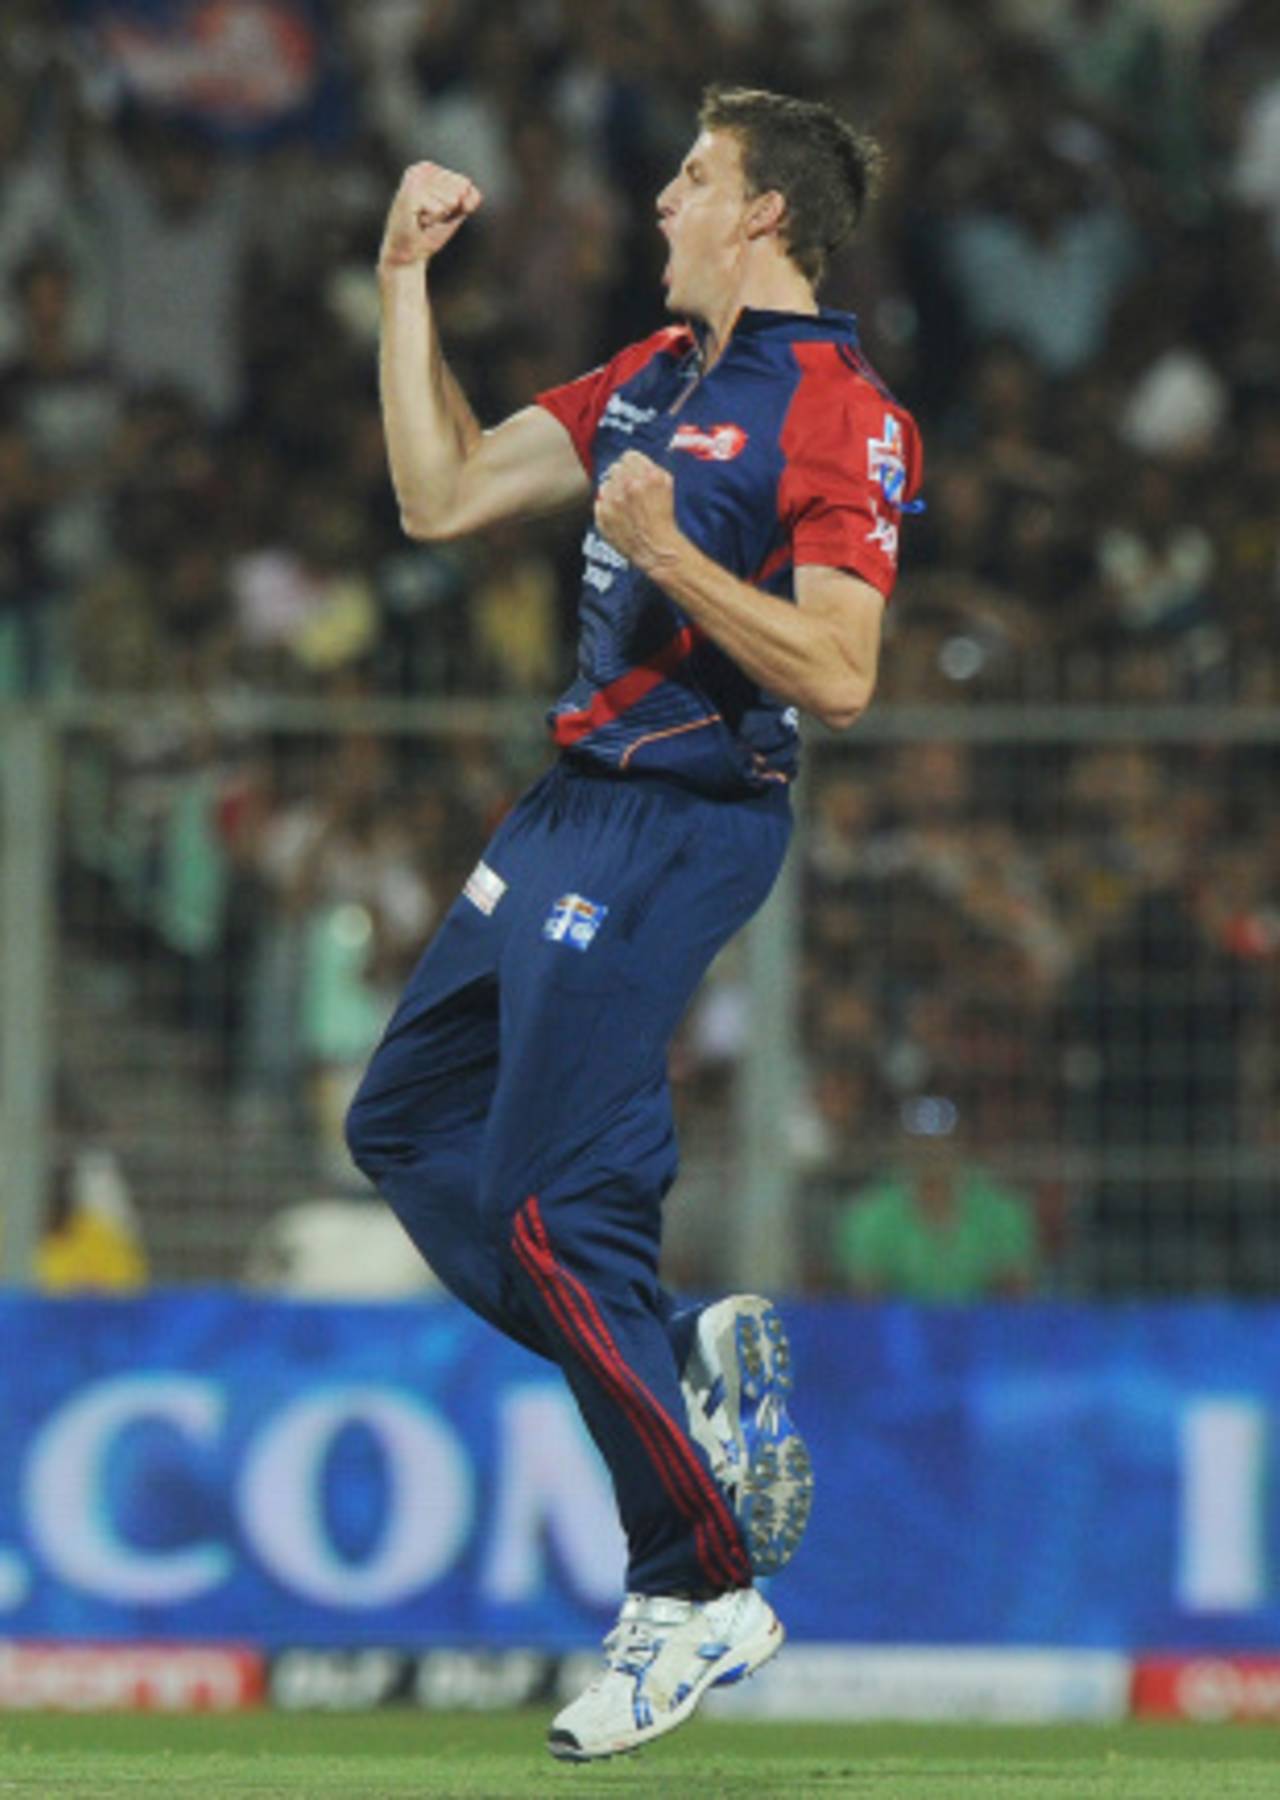 Delhi Daredevils conceded more than 200 in both the matches Morne Morkel sat out this season&nbsp;&nbsp;&bull;&nbsp;&nbsp;AFP